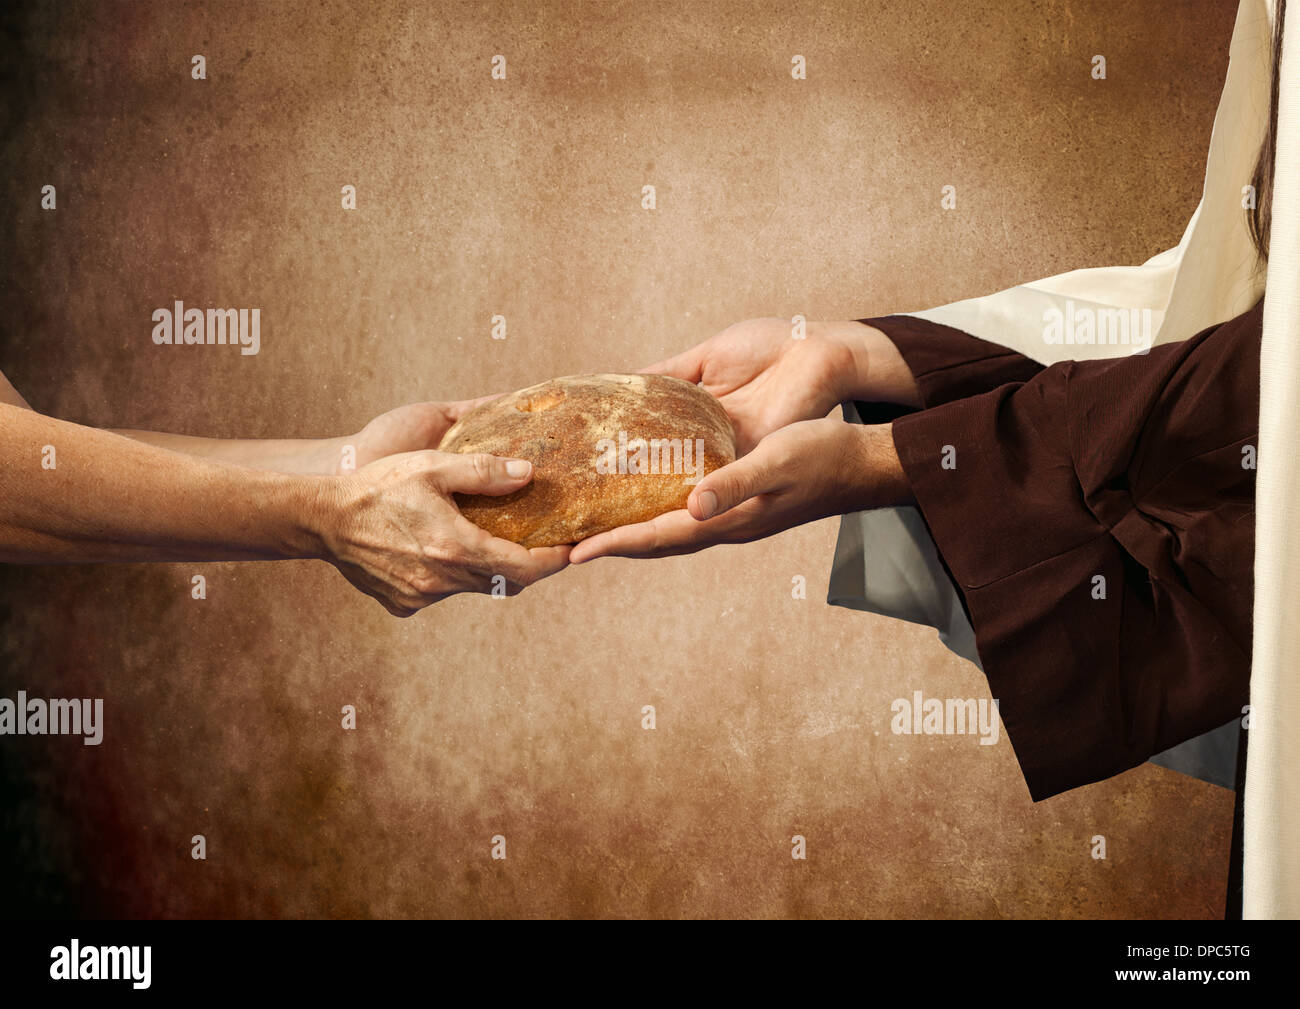 Jesus gives the bread to a beggar on beige background Stock Photo